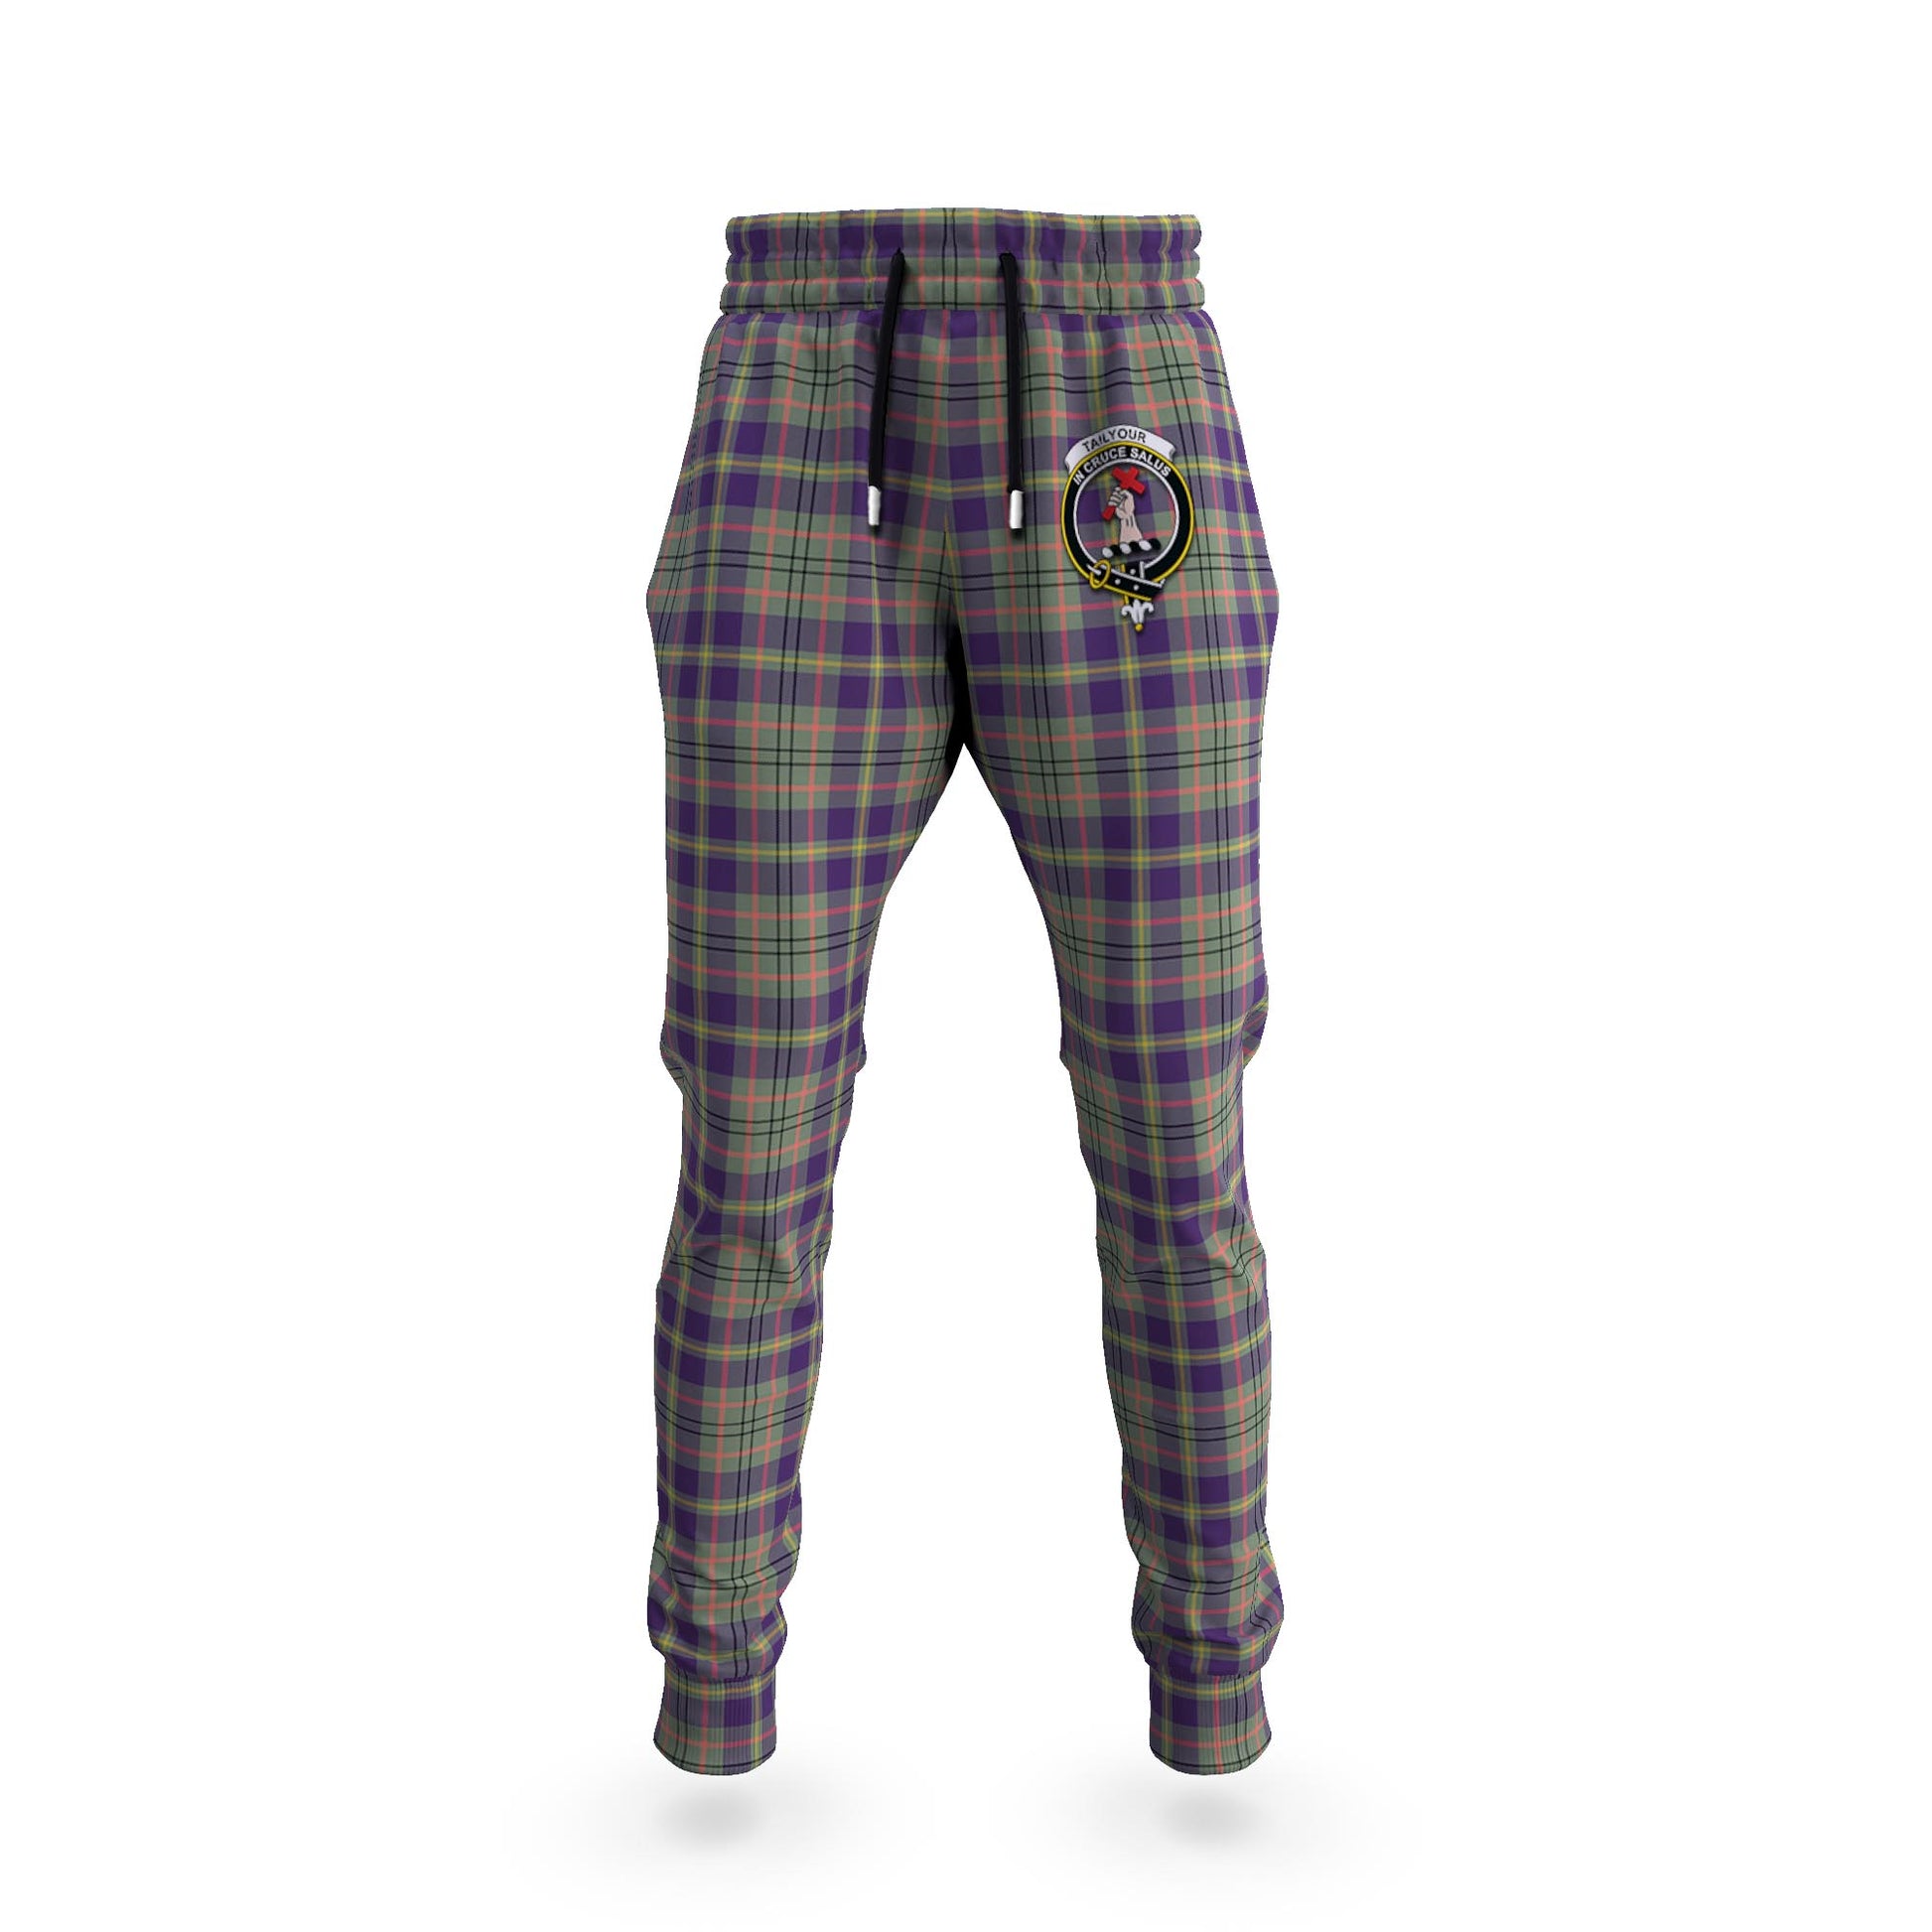 Taylor Weathered Tartan Joggers Pants with Family Crest - Tartanvibesclothing Shop